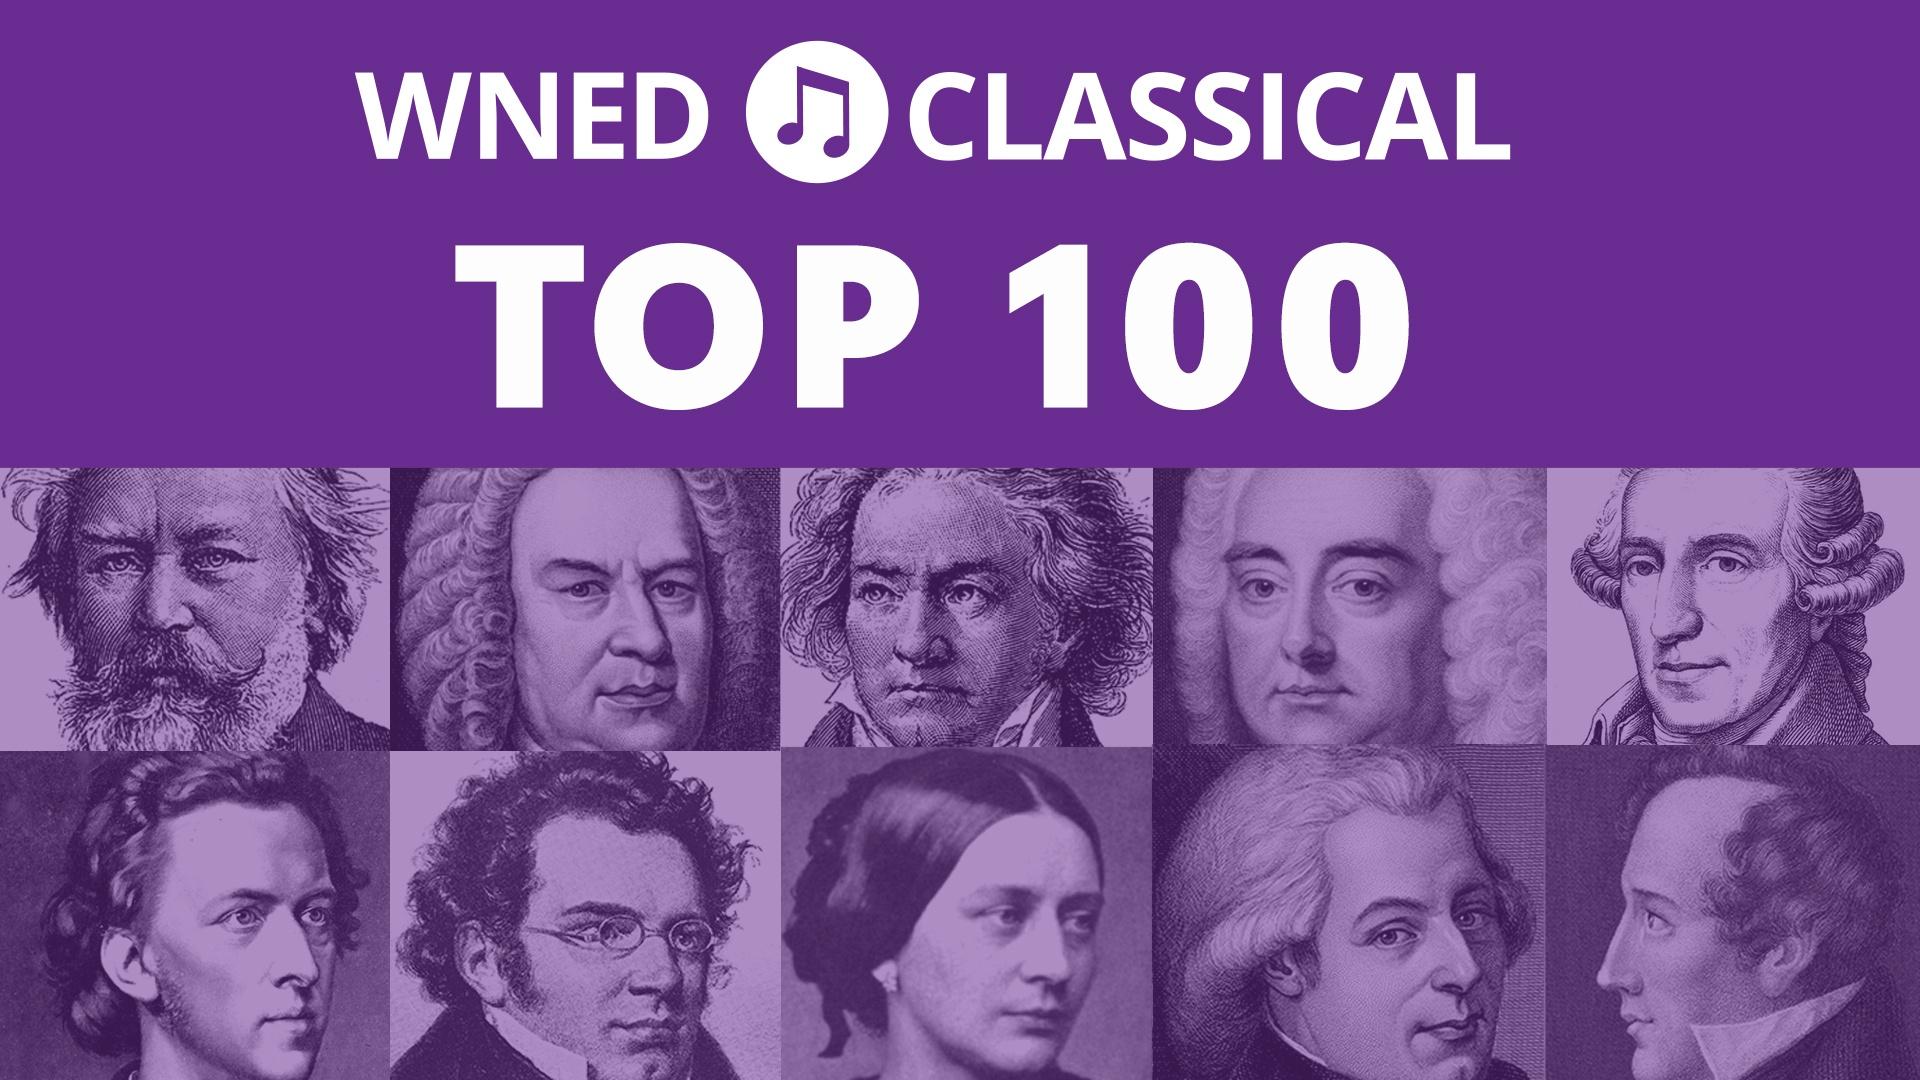 WNED Classical Top 100